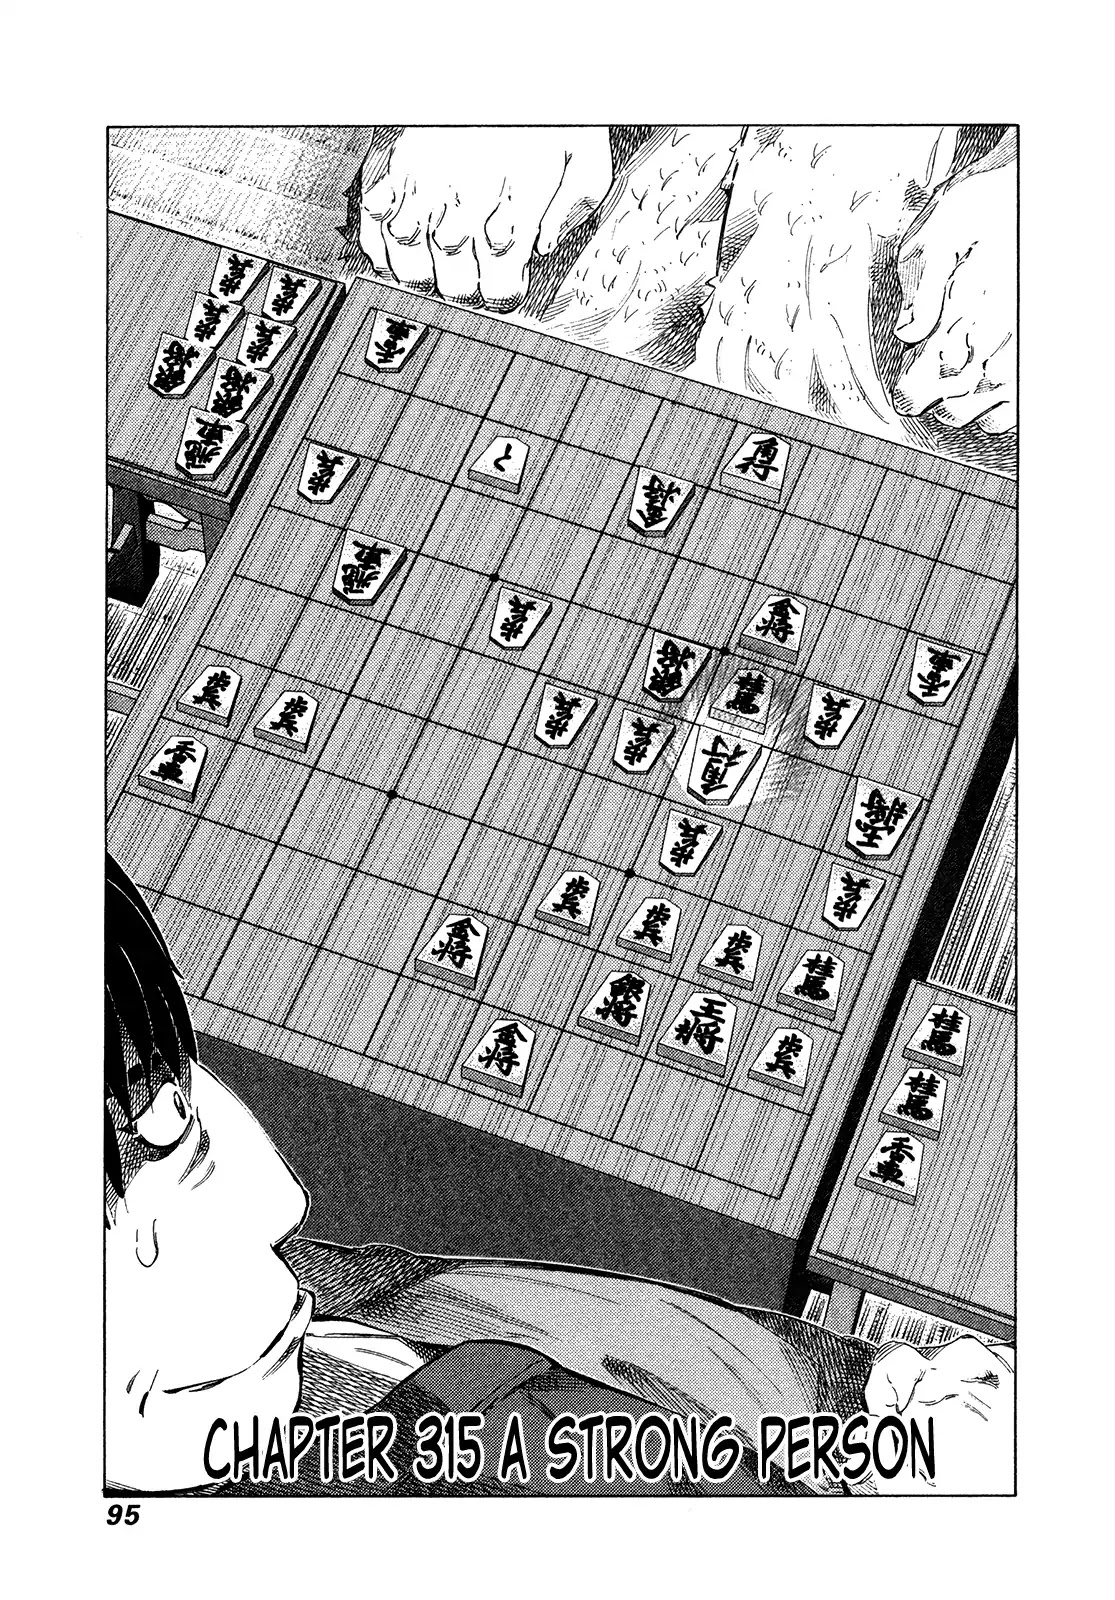 81 Diver Chapter 315 #1